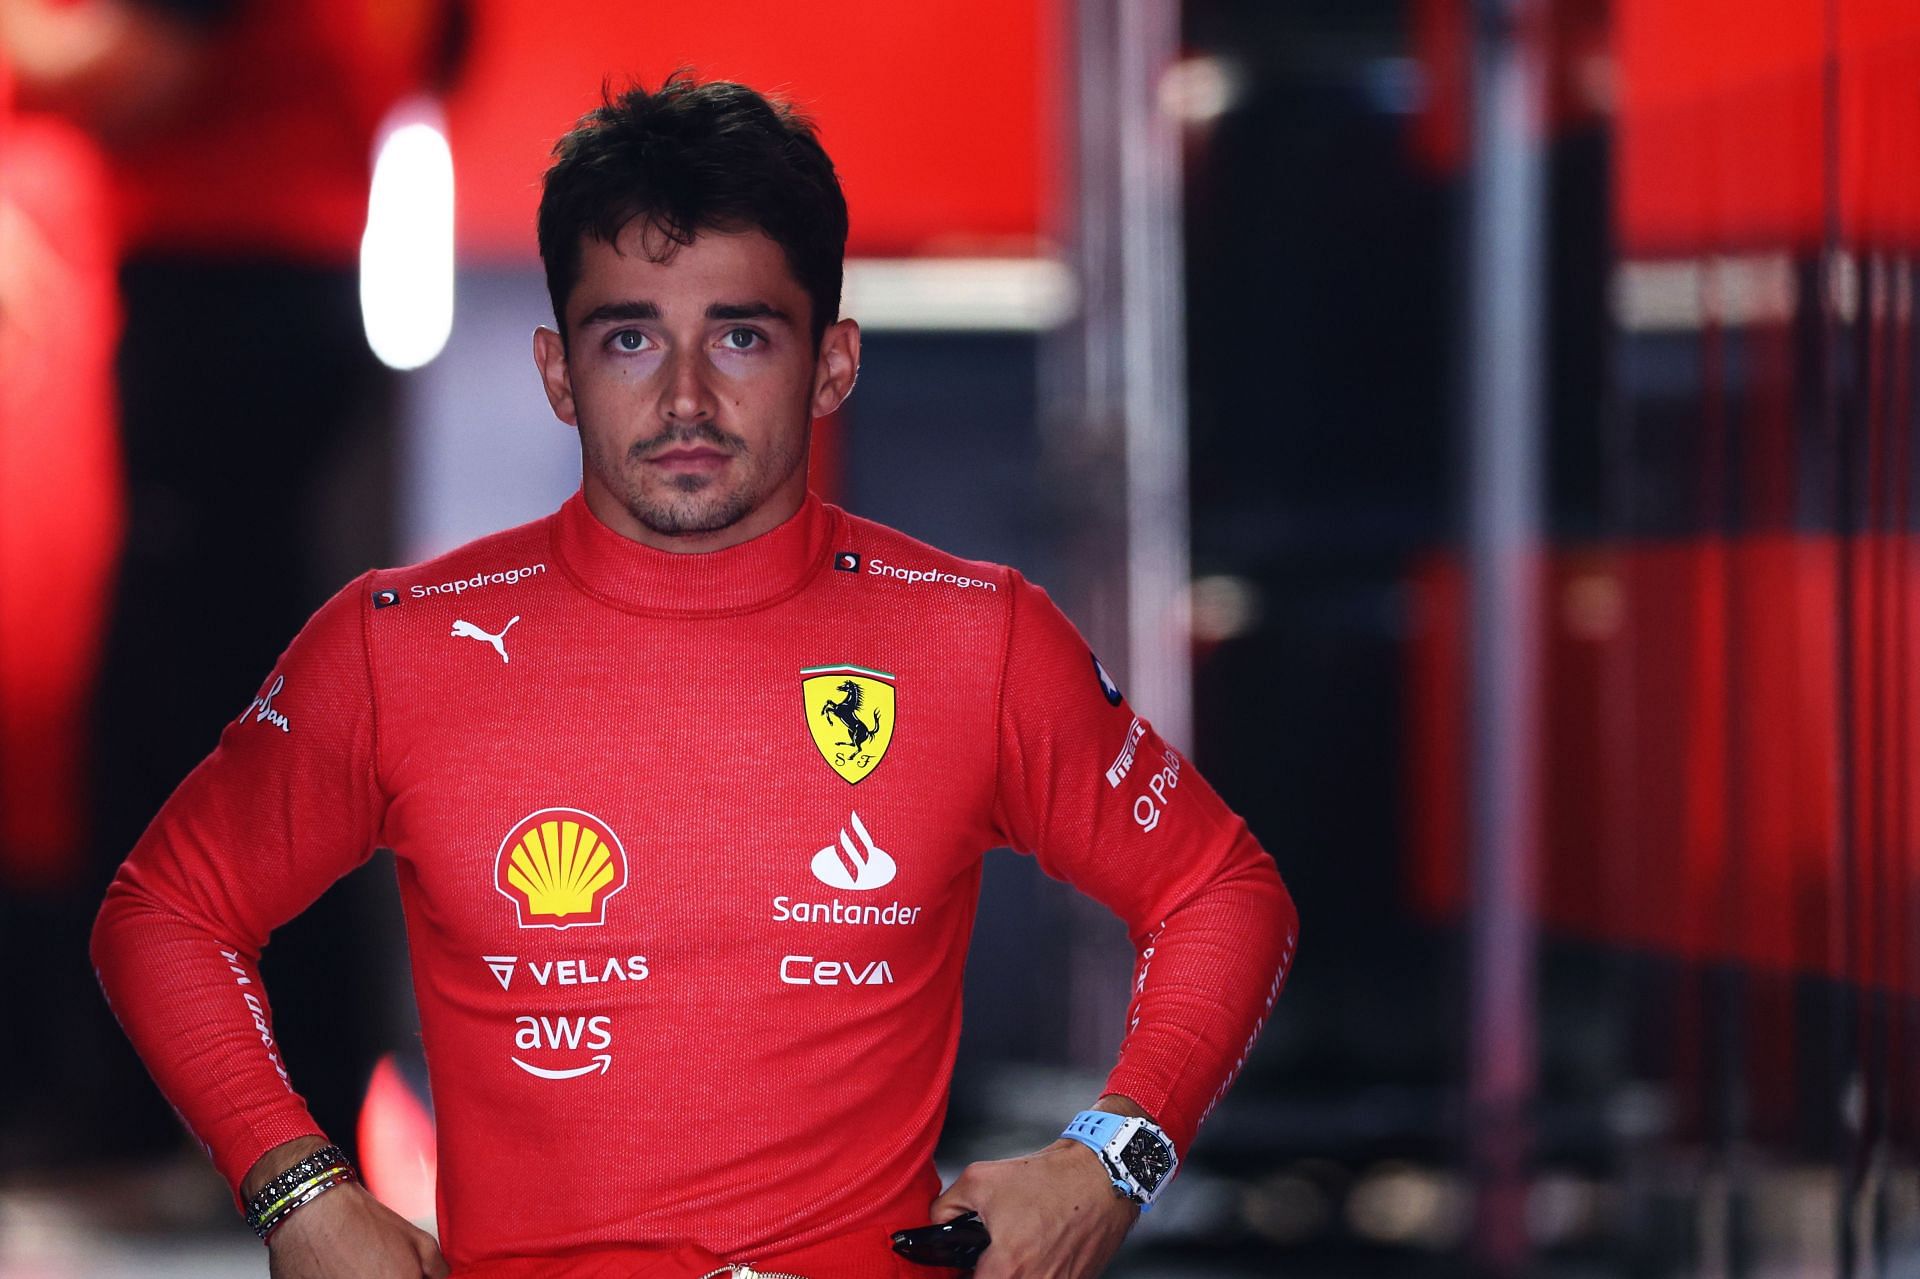 Charles Leclerc crashed out of the lead at the 2022 F1 French GP to effectively gift Red Bull and Max Verstappen with victory